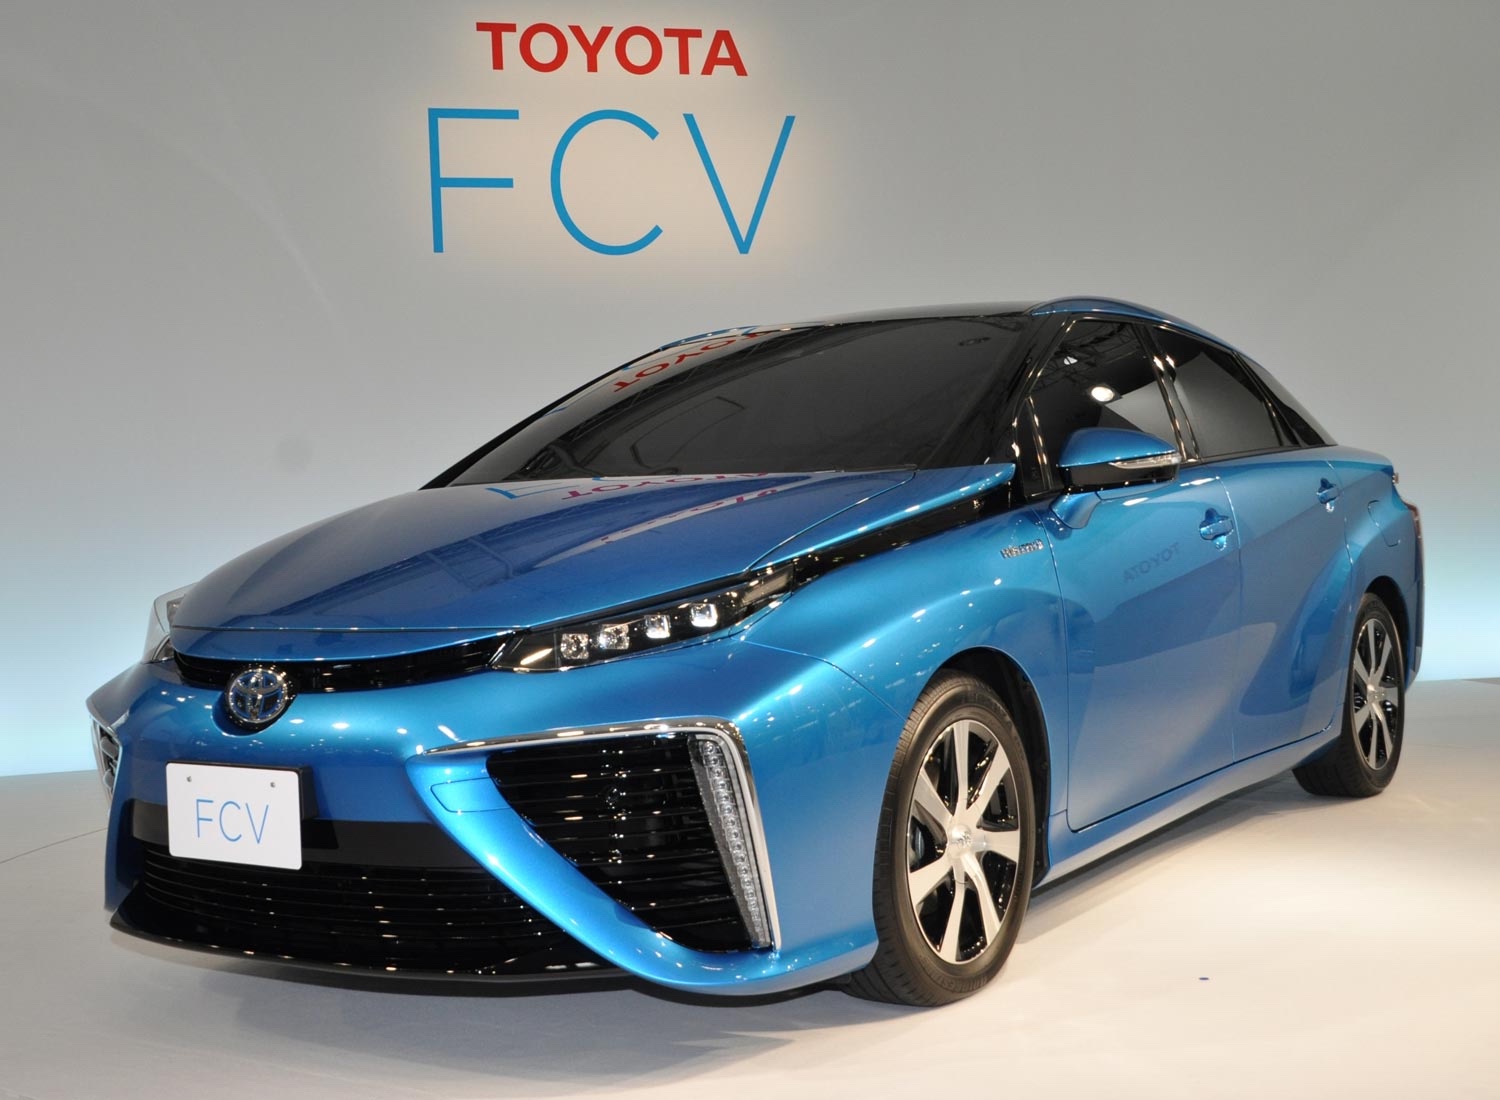 Toyota-Mirai-The-Future-Hydrogen-Fuel-cell-car-from-Toyota-2